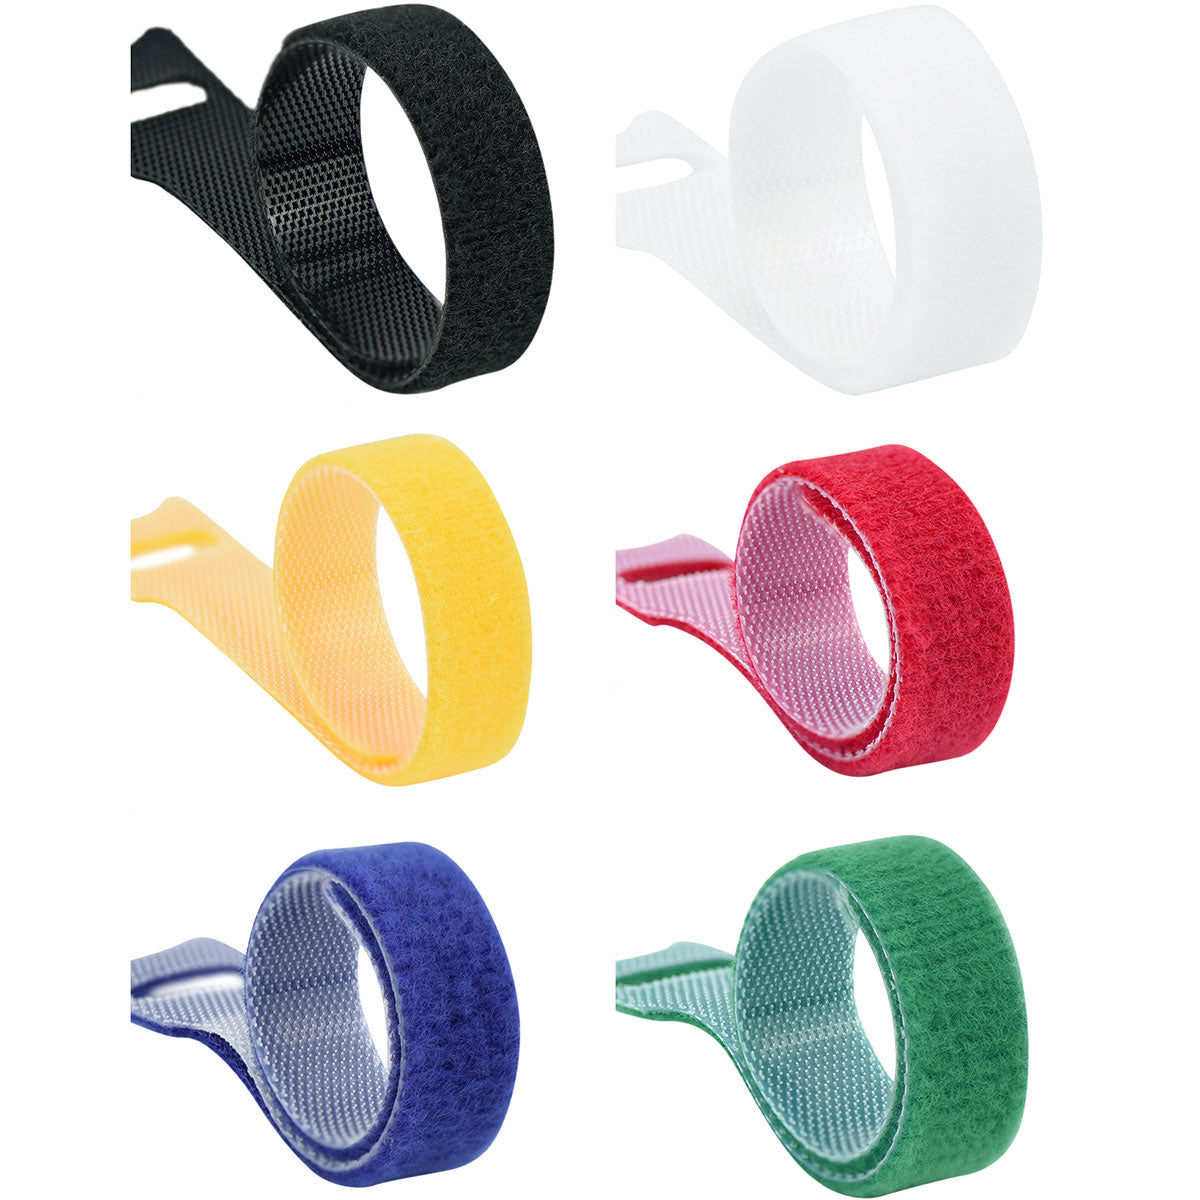 6 Mixed Color Hook and Loop Cable Ties 50 Pieces